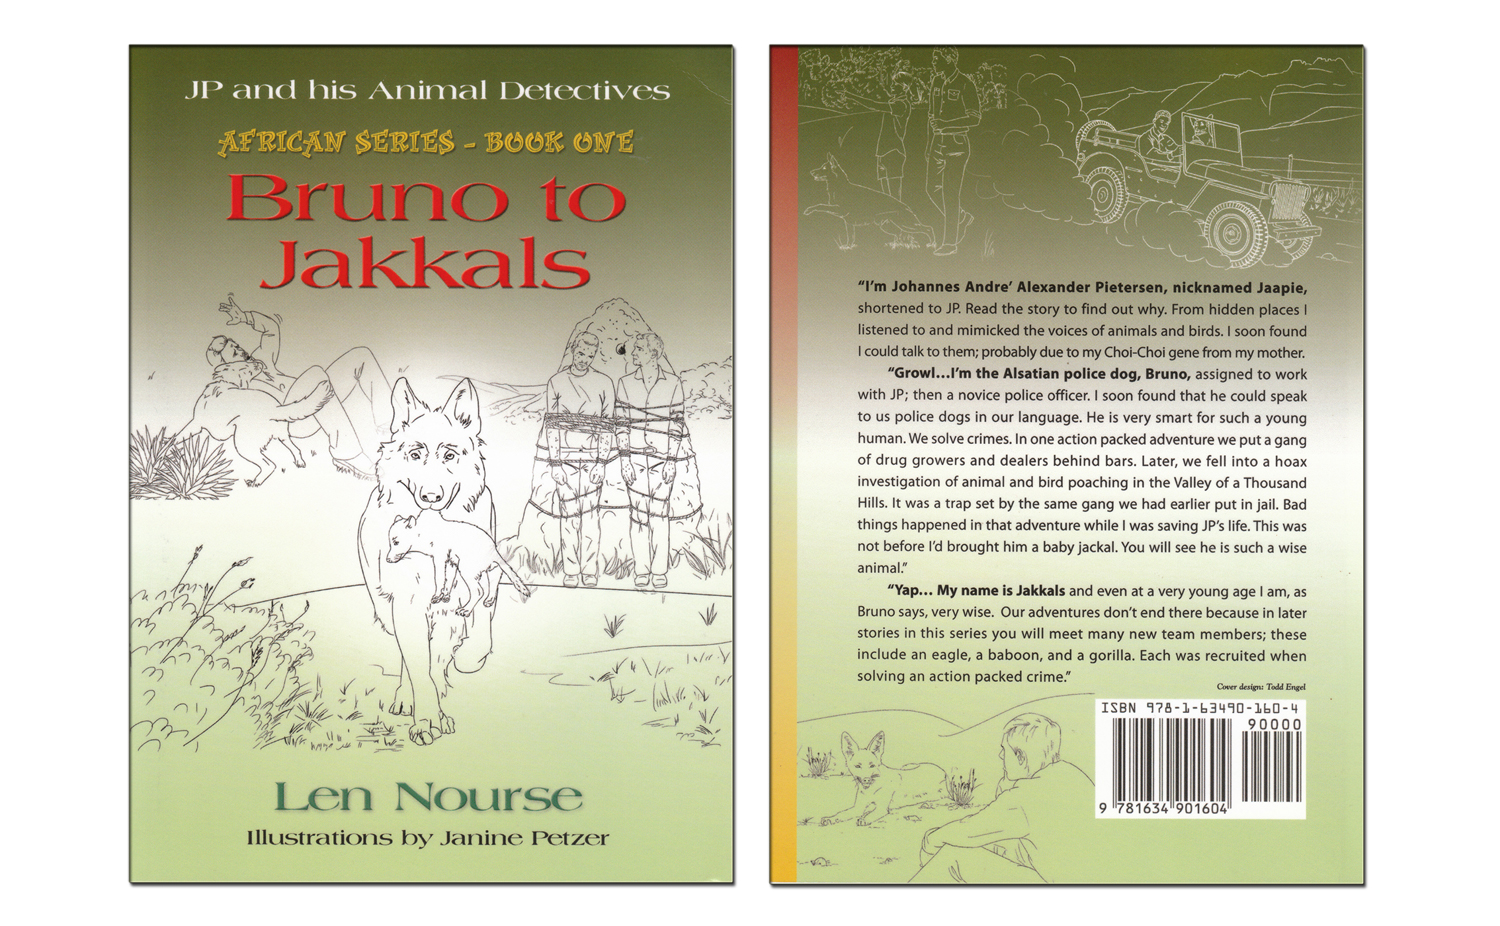 Bruno to Jakkals - JP & his Animal Detectives The African Series Book 1